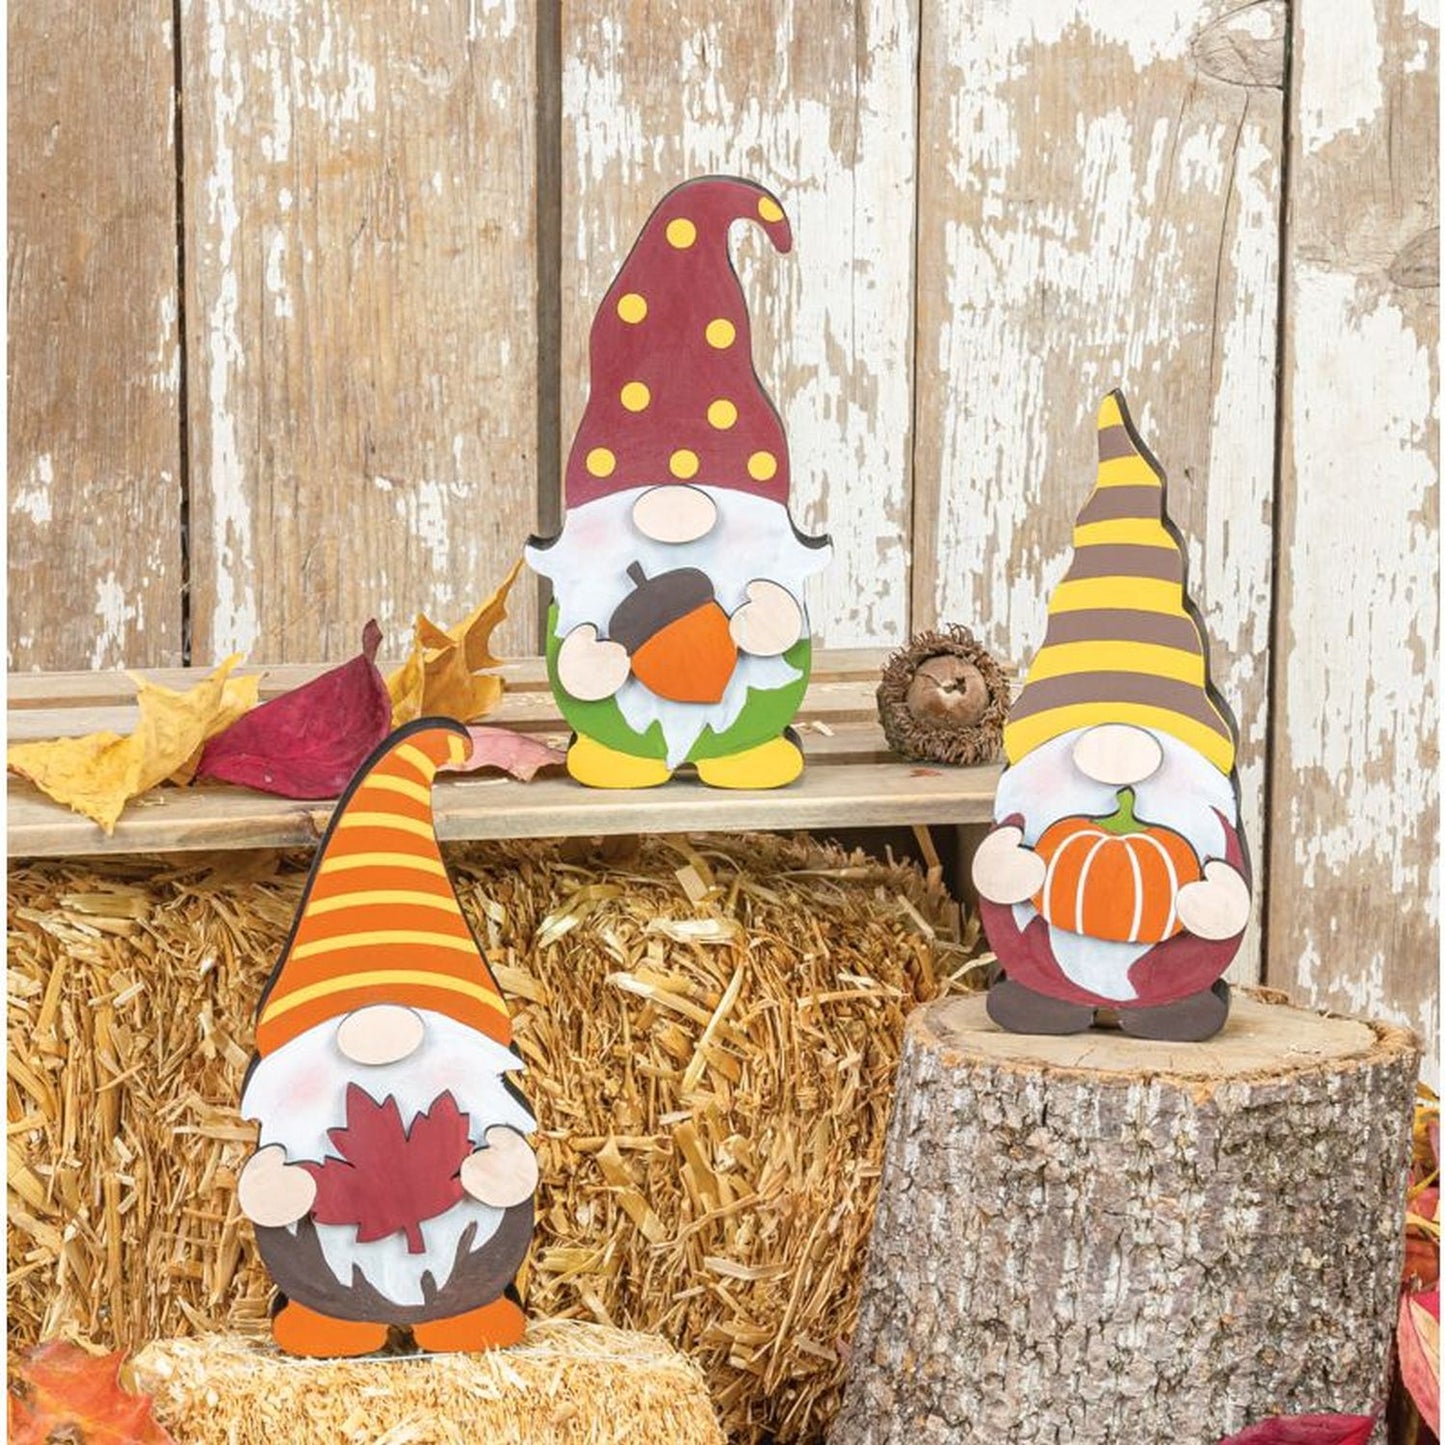 Hanna's Handiworks Fall Wooden Gnome Tabletop Set Of 3 Assortments